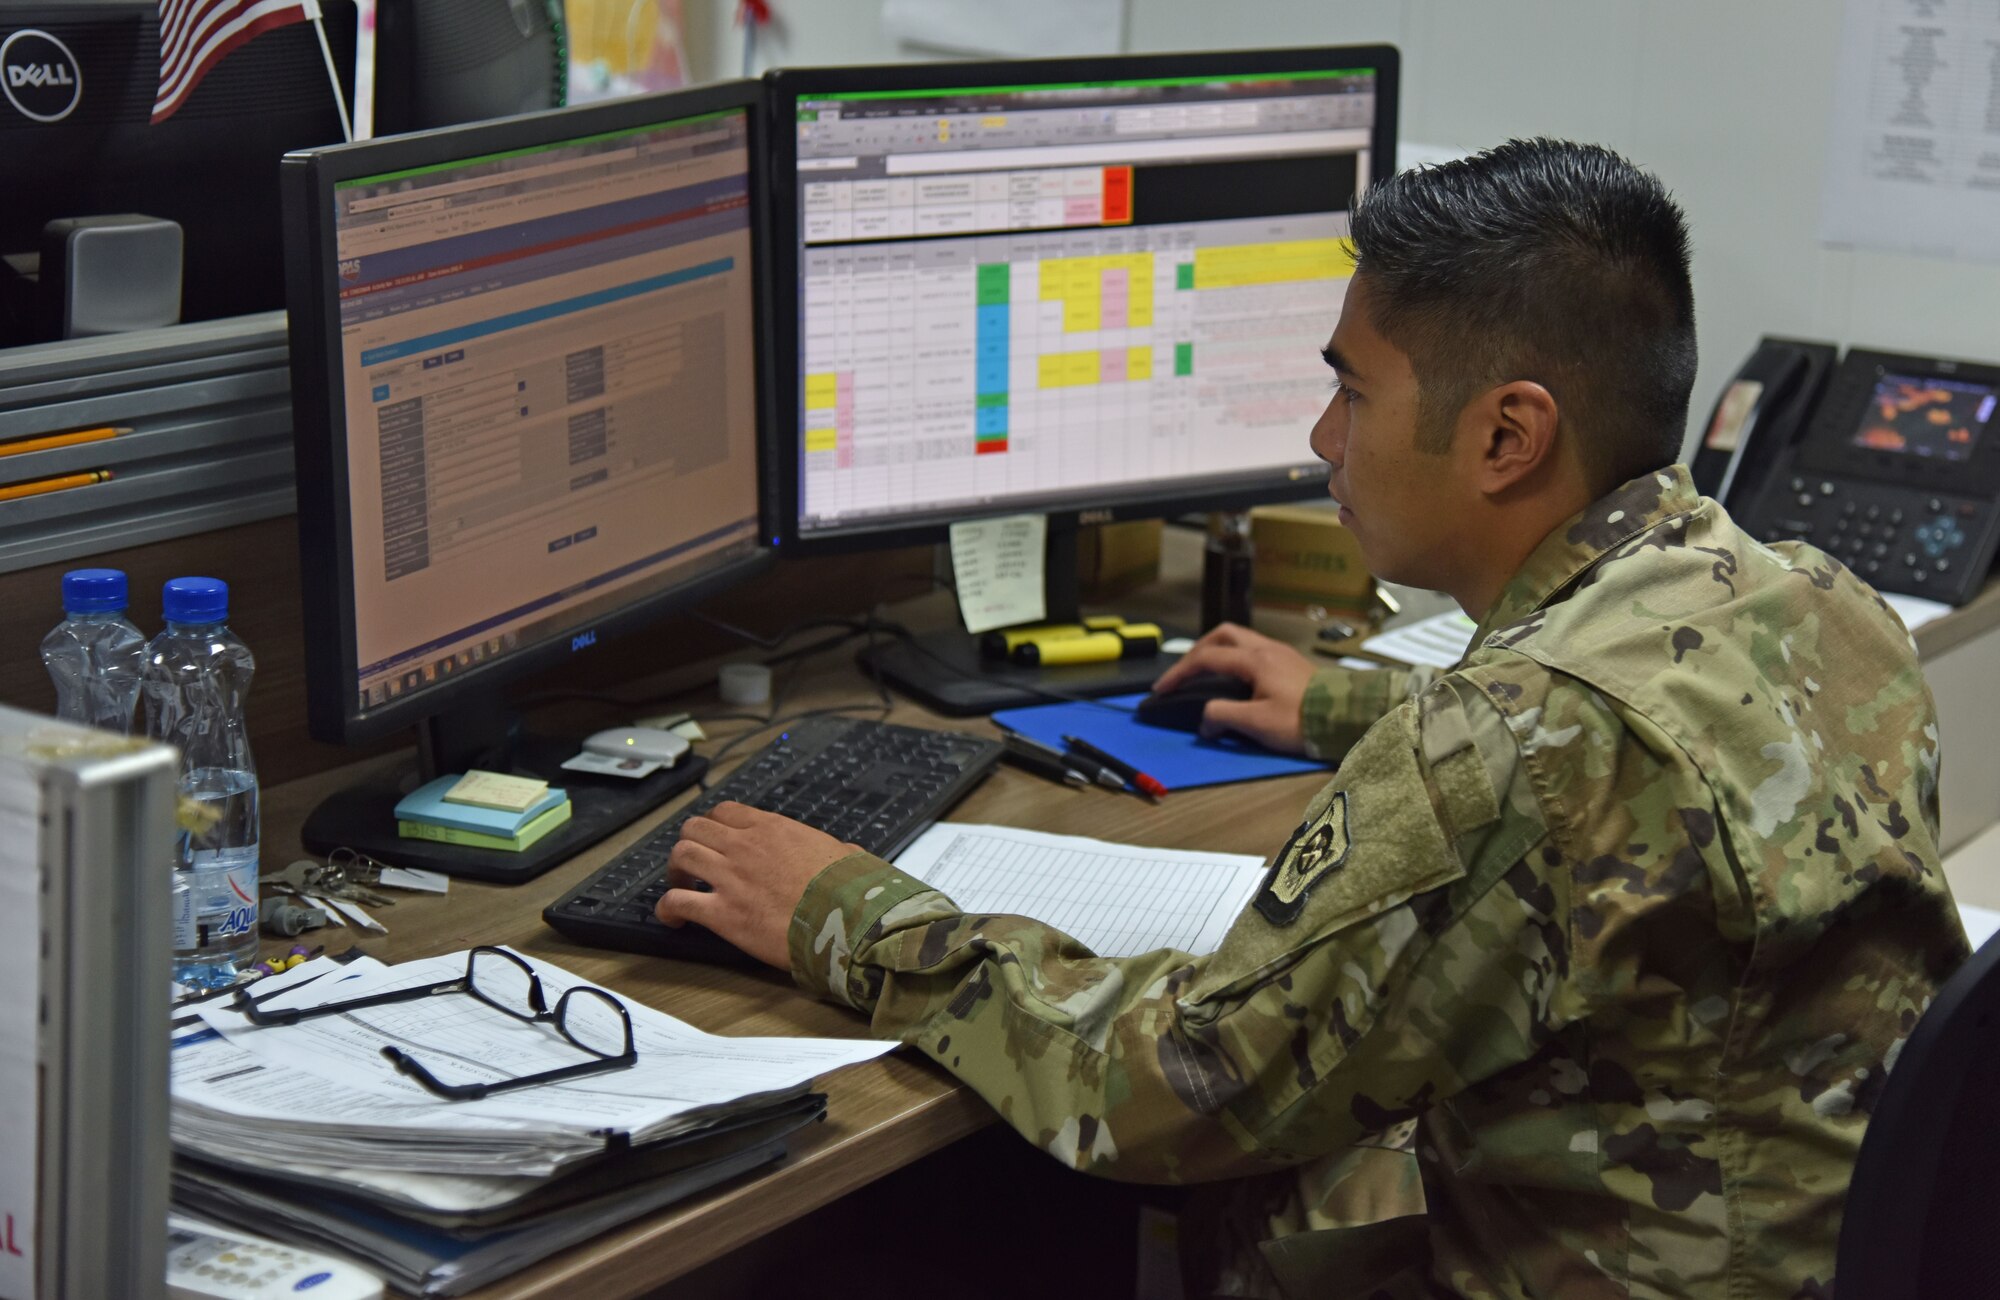 U.S. Air Force Senior Airman Earl Hernandez, 407th Expeditionary Logistics Readiness Squadron Vehicle Management fleet controller, enters information into the Defense Property Accountability System at the 407th Air Expeditionary Group in Southwest Asia, Dec. 18, 2017. Hernandez and the Fleet Management section of the 407th ELRS are responsible for tracking all of the 407th AEG’s government owned and leased vehicles. (U.S. Air Force photo by Staff Sgt. Joshua Edwards/Released)